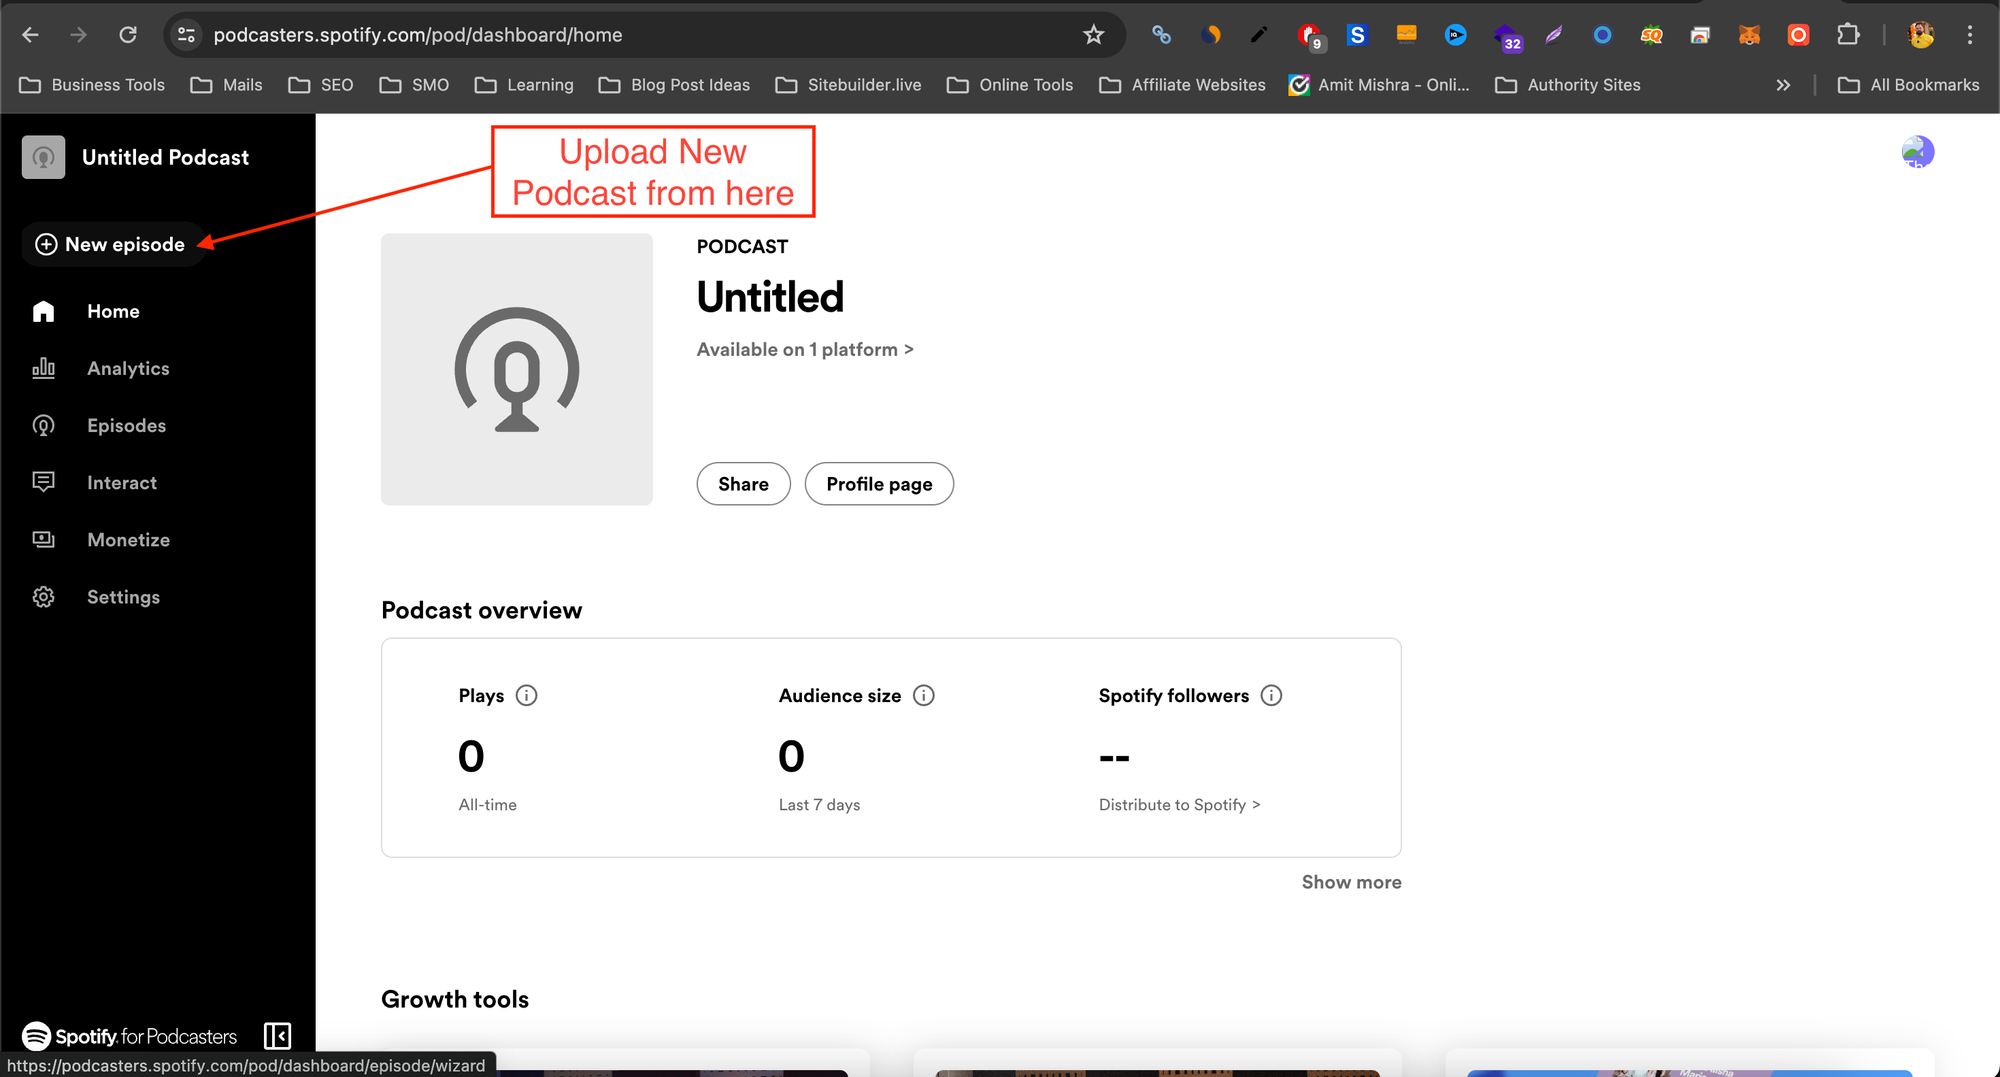 How to upload podcast on Spotify for Podcasters platform